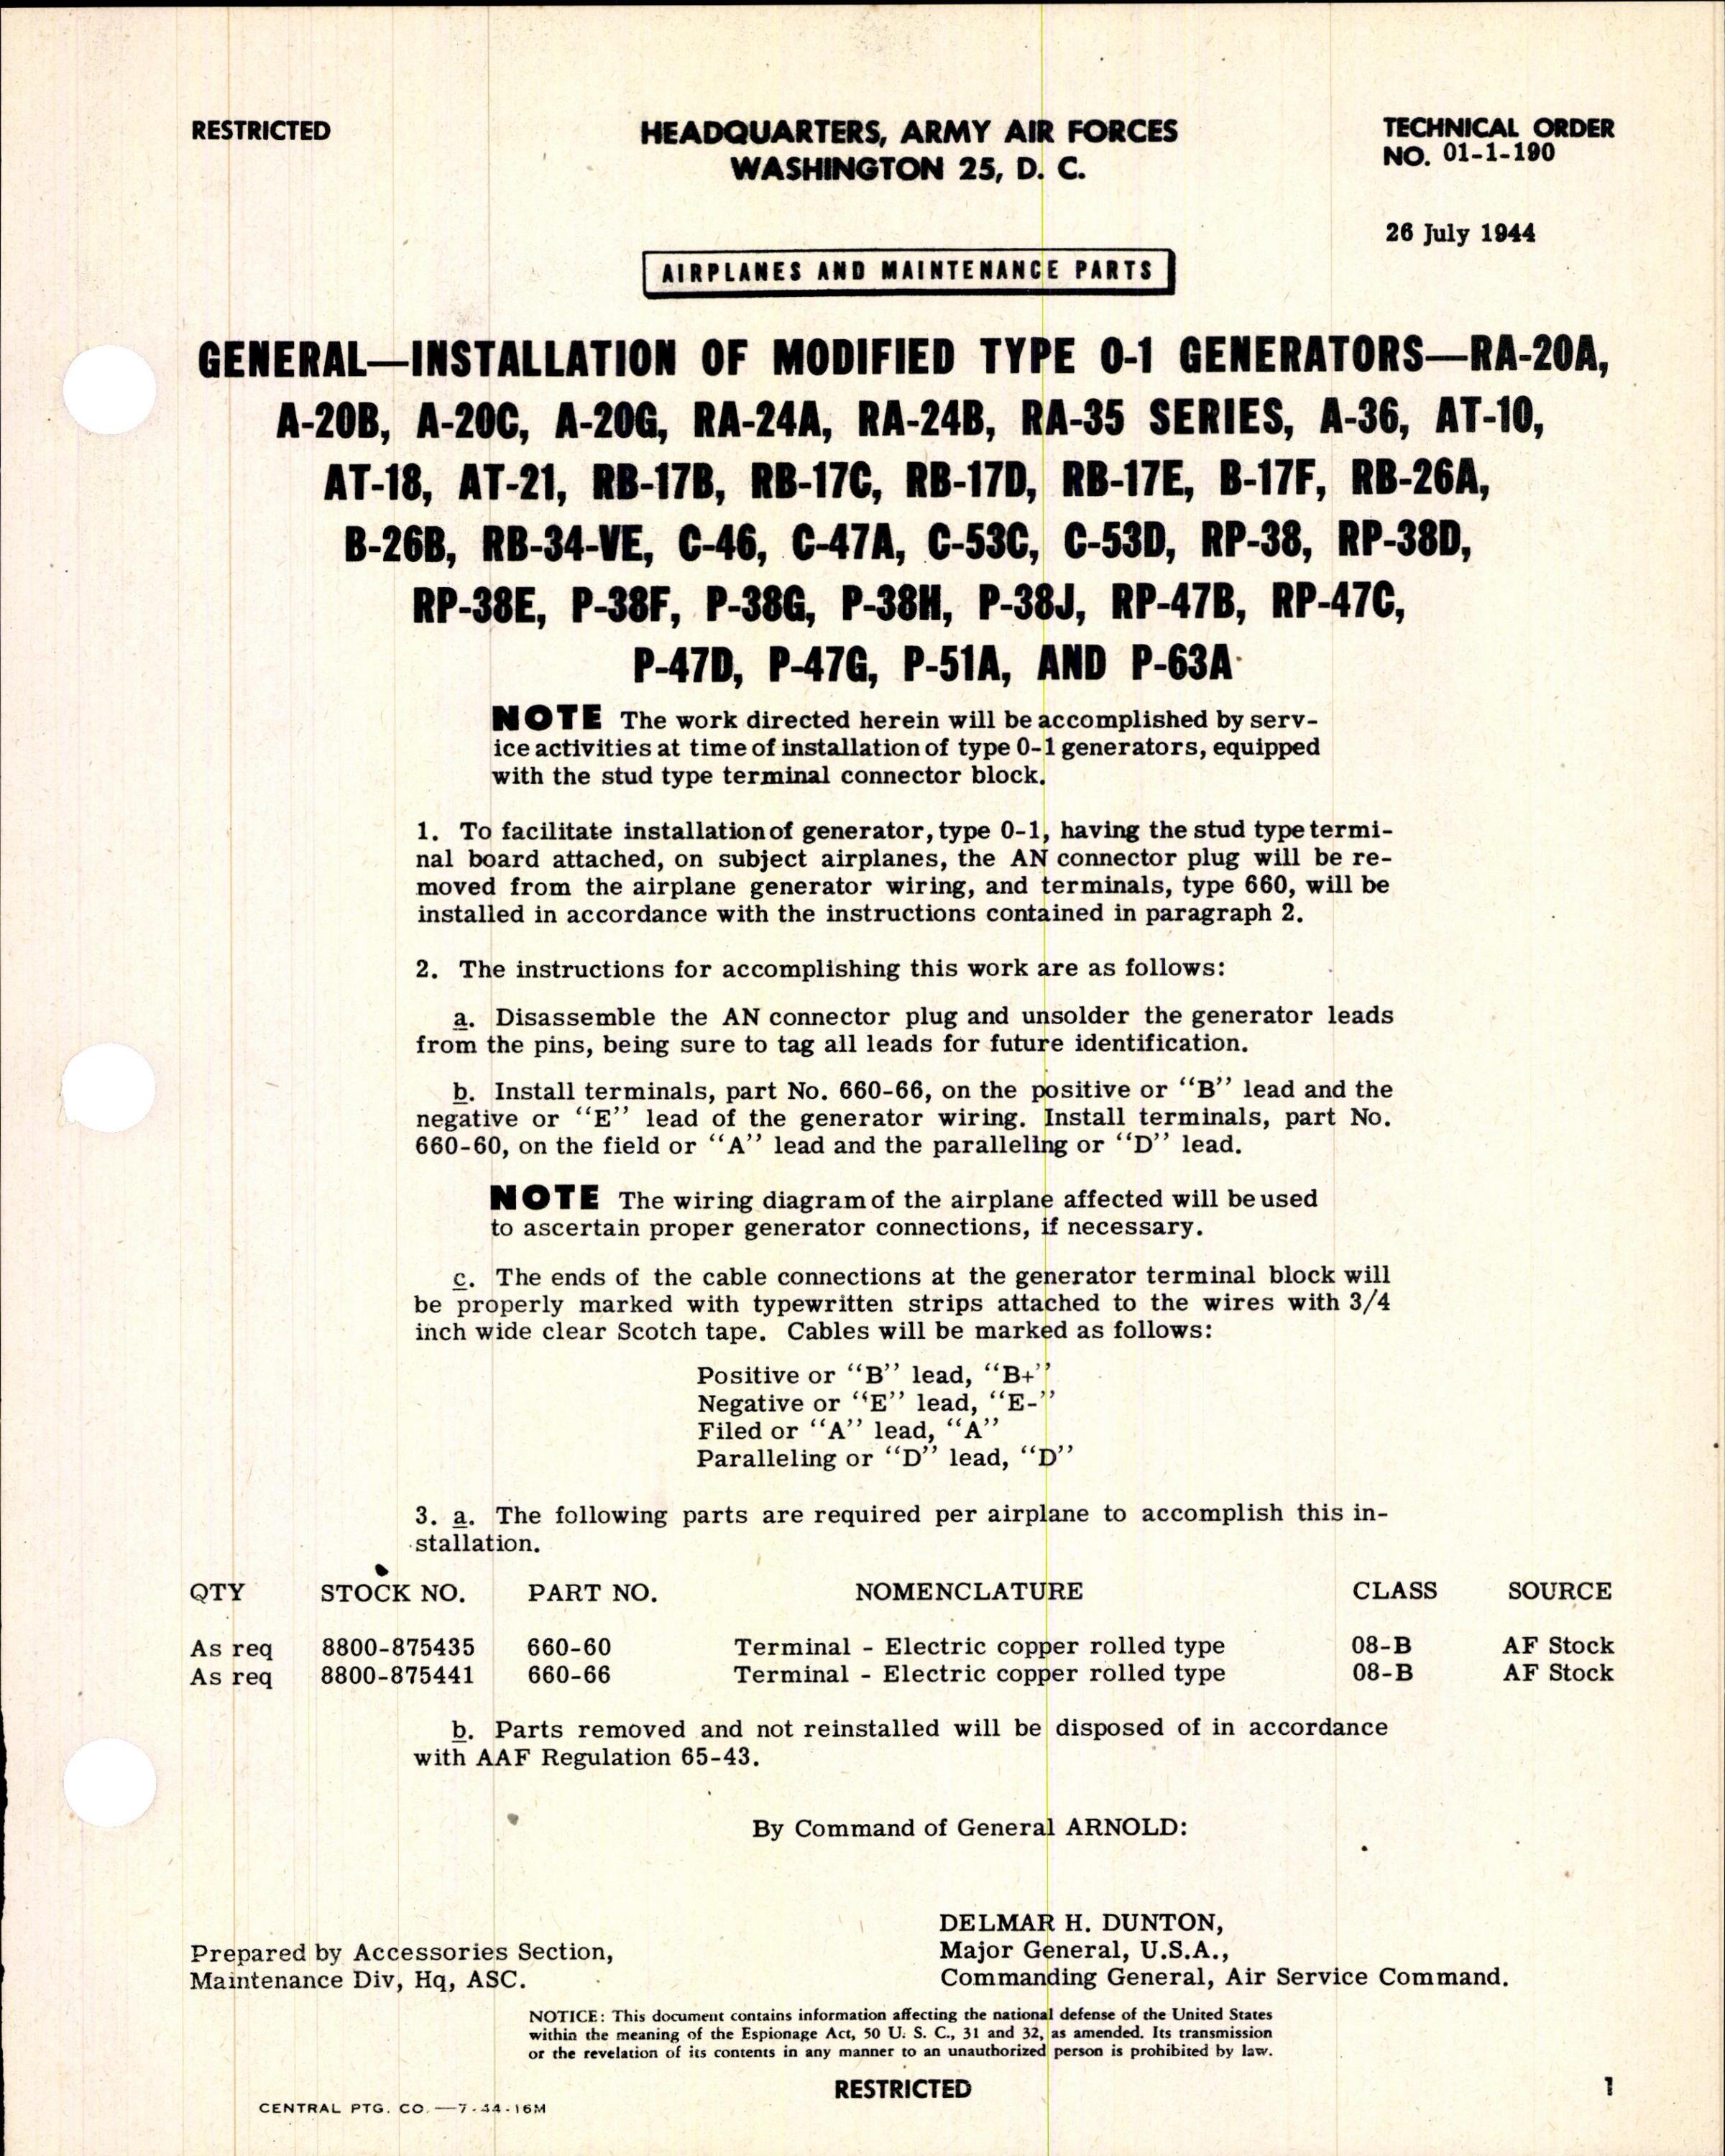 Sample page 1 from AirCorps Library document: Installation of Modified Type 0-1 Generators